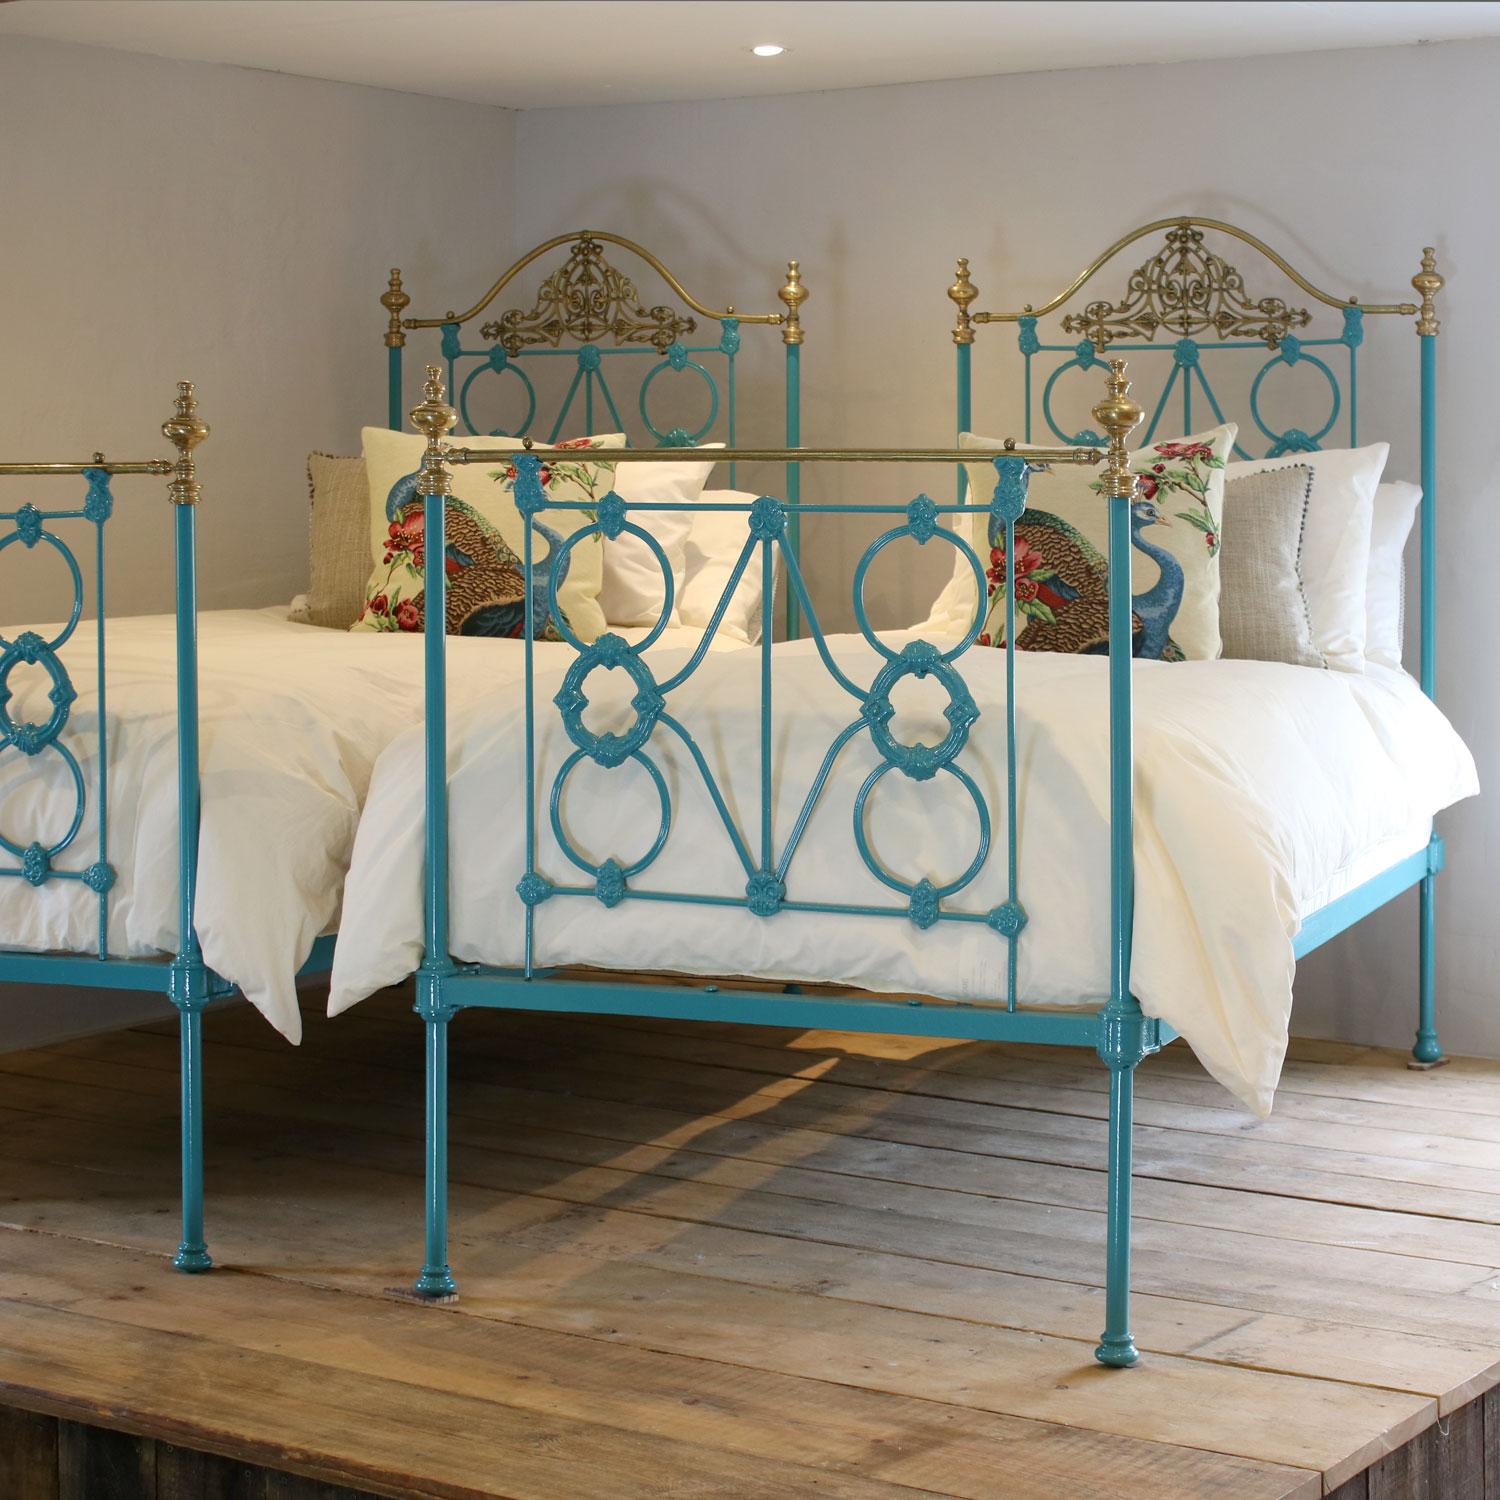 A matching pair of twin brass and iron antique beds with cast iron panels, ornate brass castings and serpentine brass top rails on the head ends, finished in striking turquoise blue.

These beds accept 3ft wide (36 inch or 90 cm) bases and